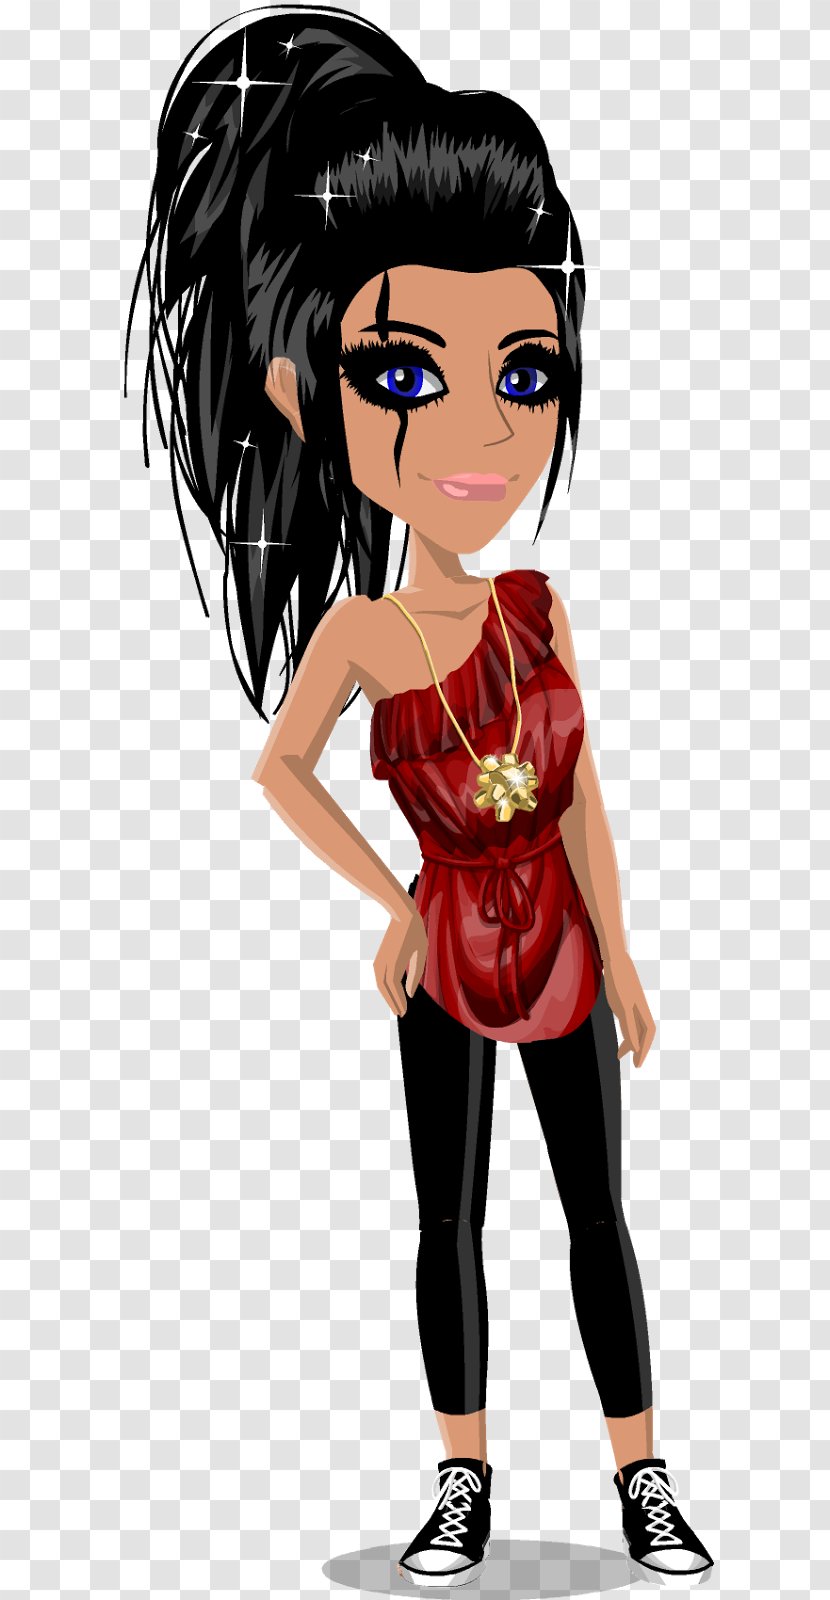 MovieStarPlanet Character Person Avatar - Flower - Silhouette Transparent PNG